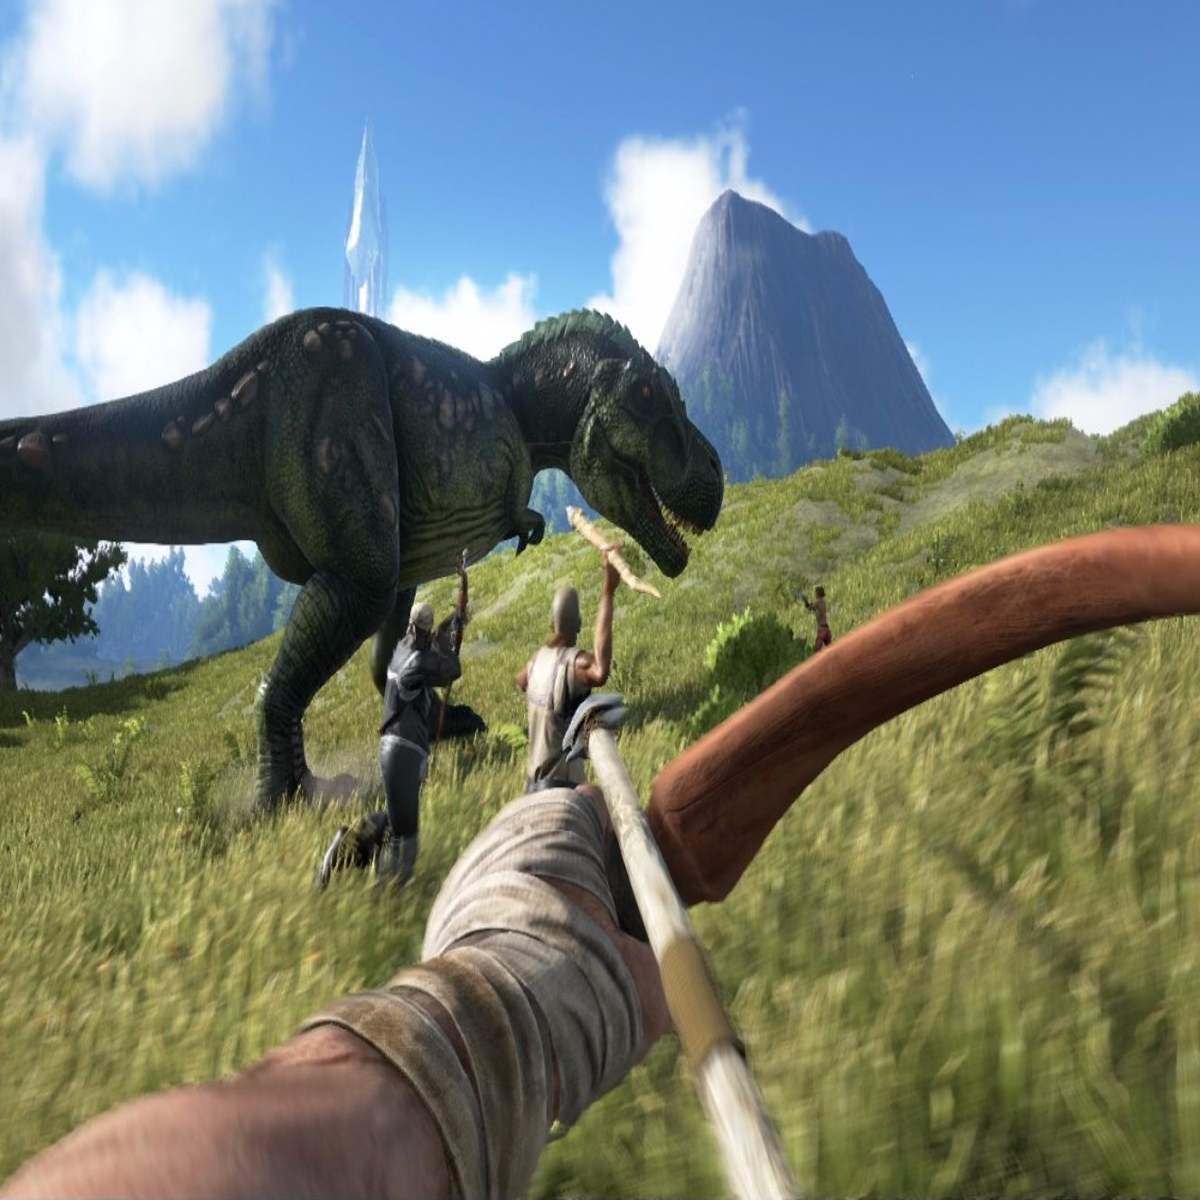 Dinosaur Games; Survival Games on the App Store